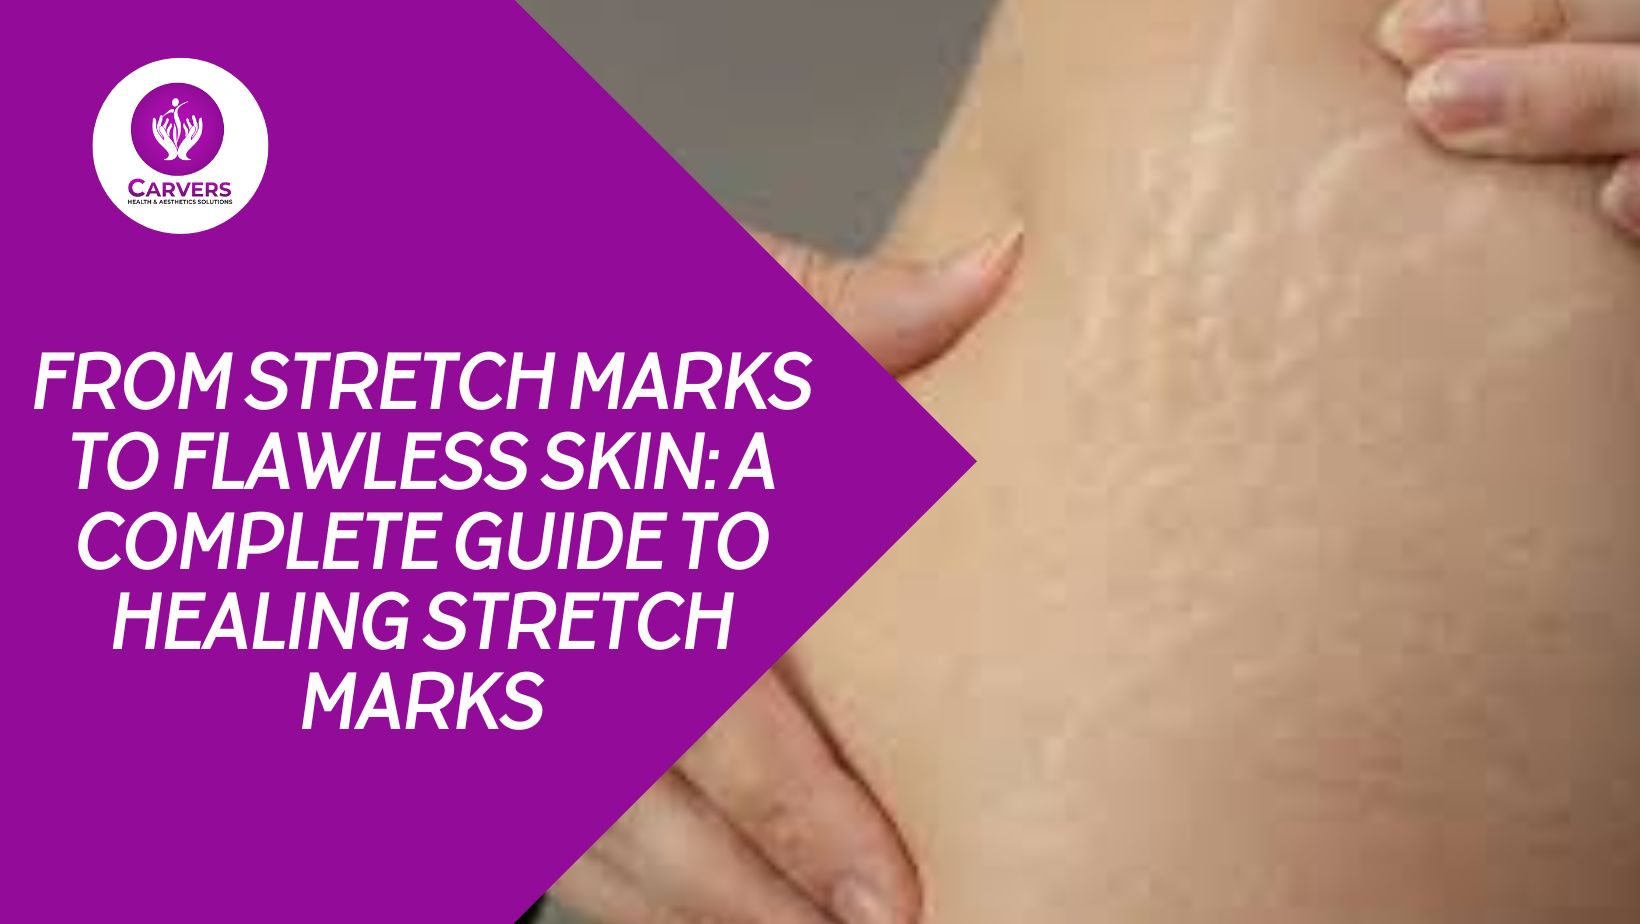 From Stretch Marks to Flawless Skin: A Complete Guide To Healing Stretch Marks